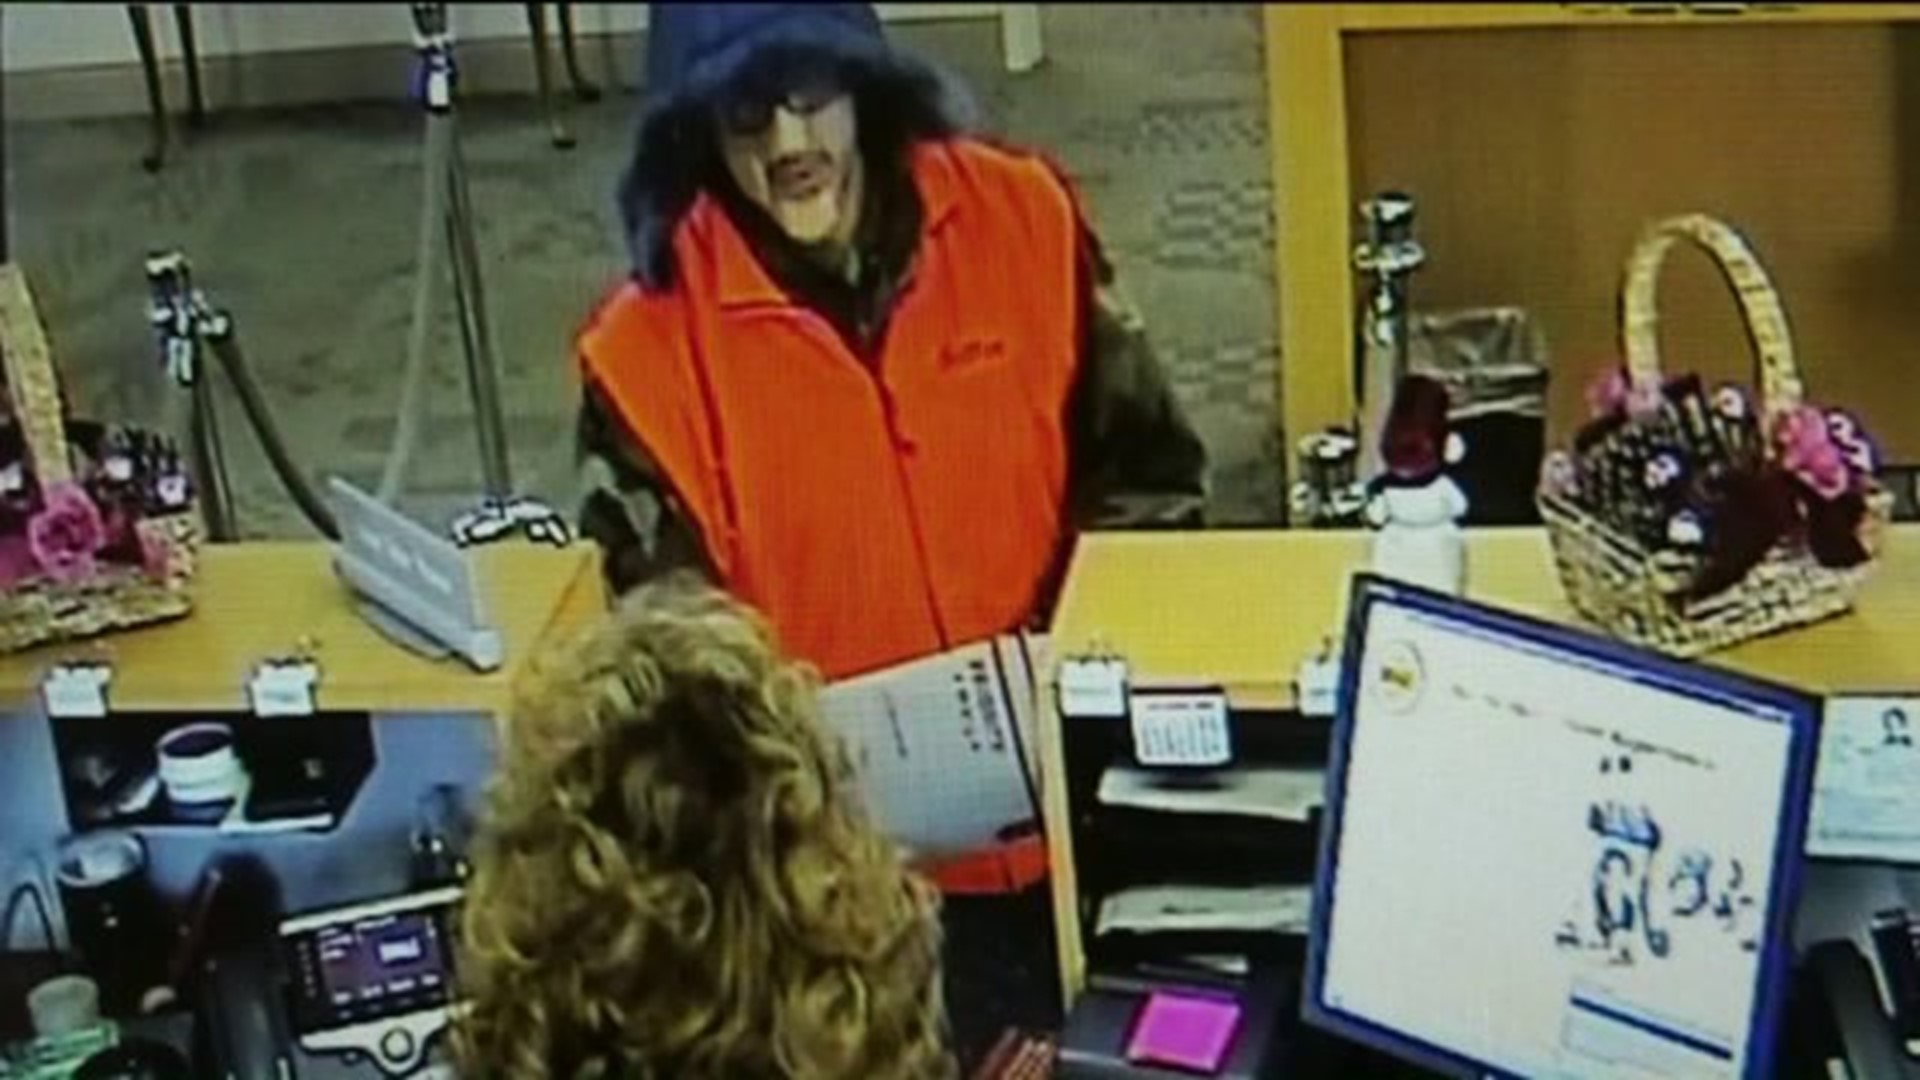 Photos of Suspected Mount Carmel Bank Robber